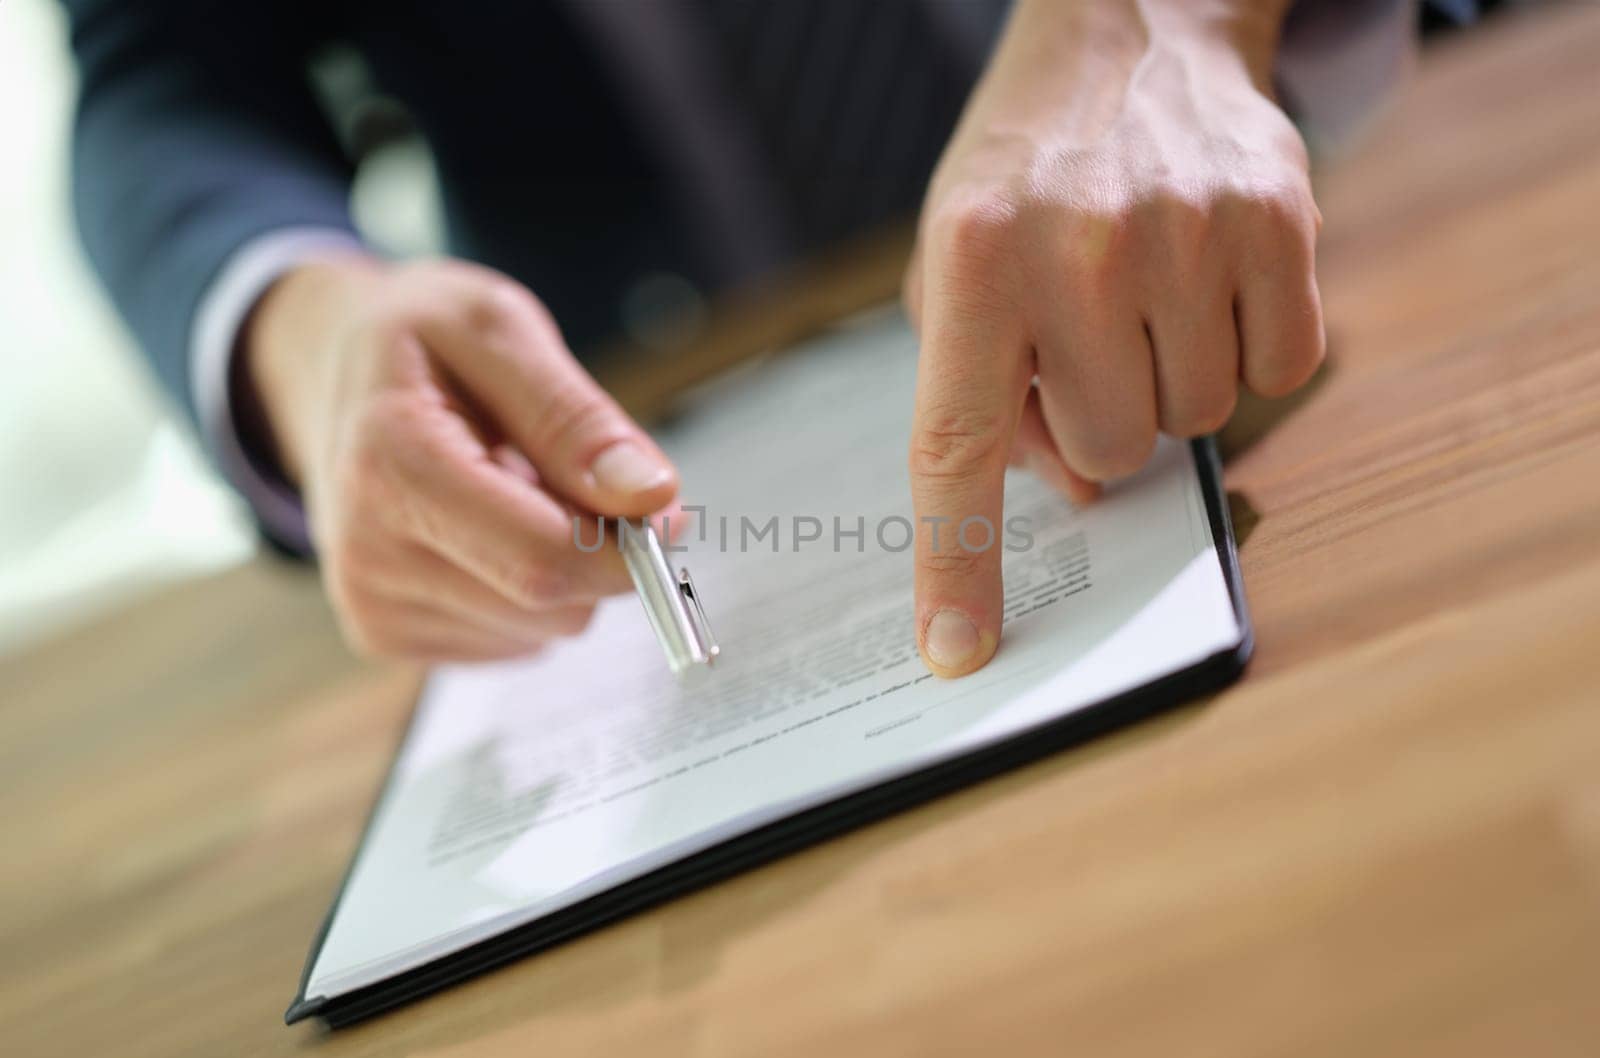 Manager showing client place to sign in document and holding out pen closeup. Legal work with clients and sale of real estate concept